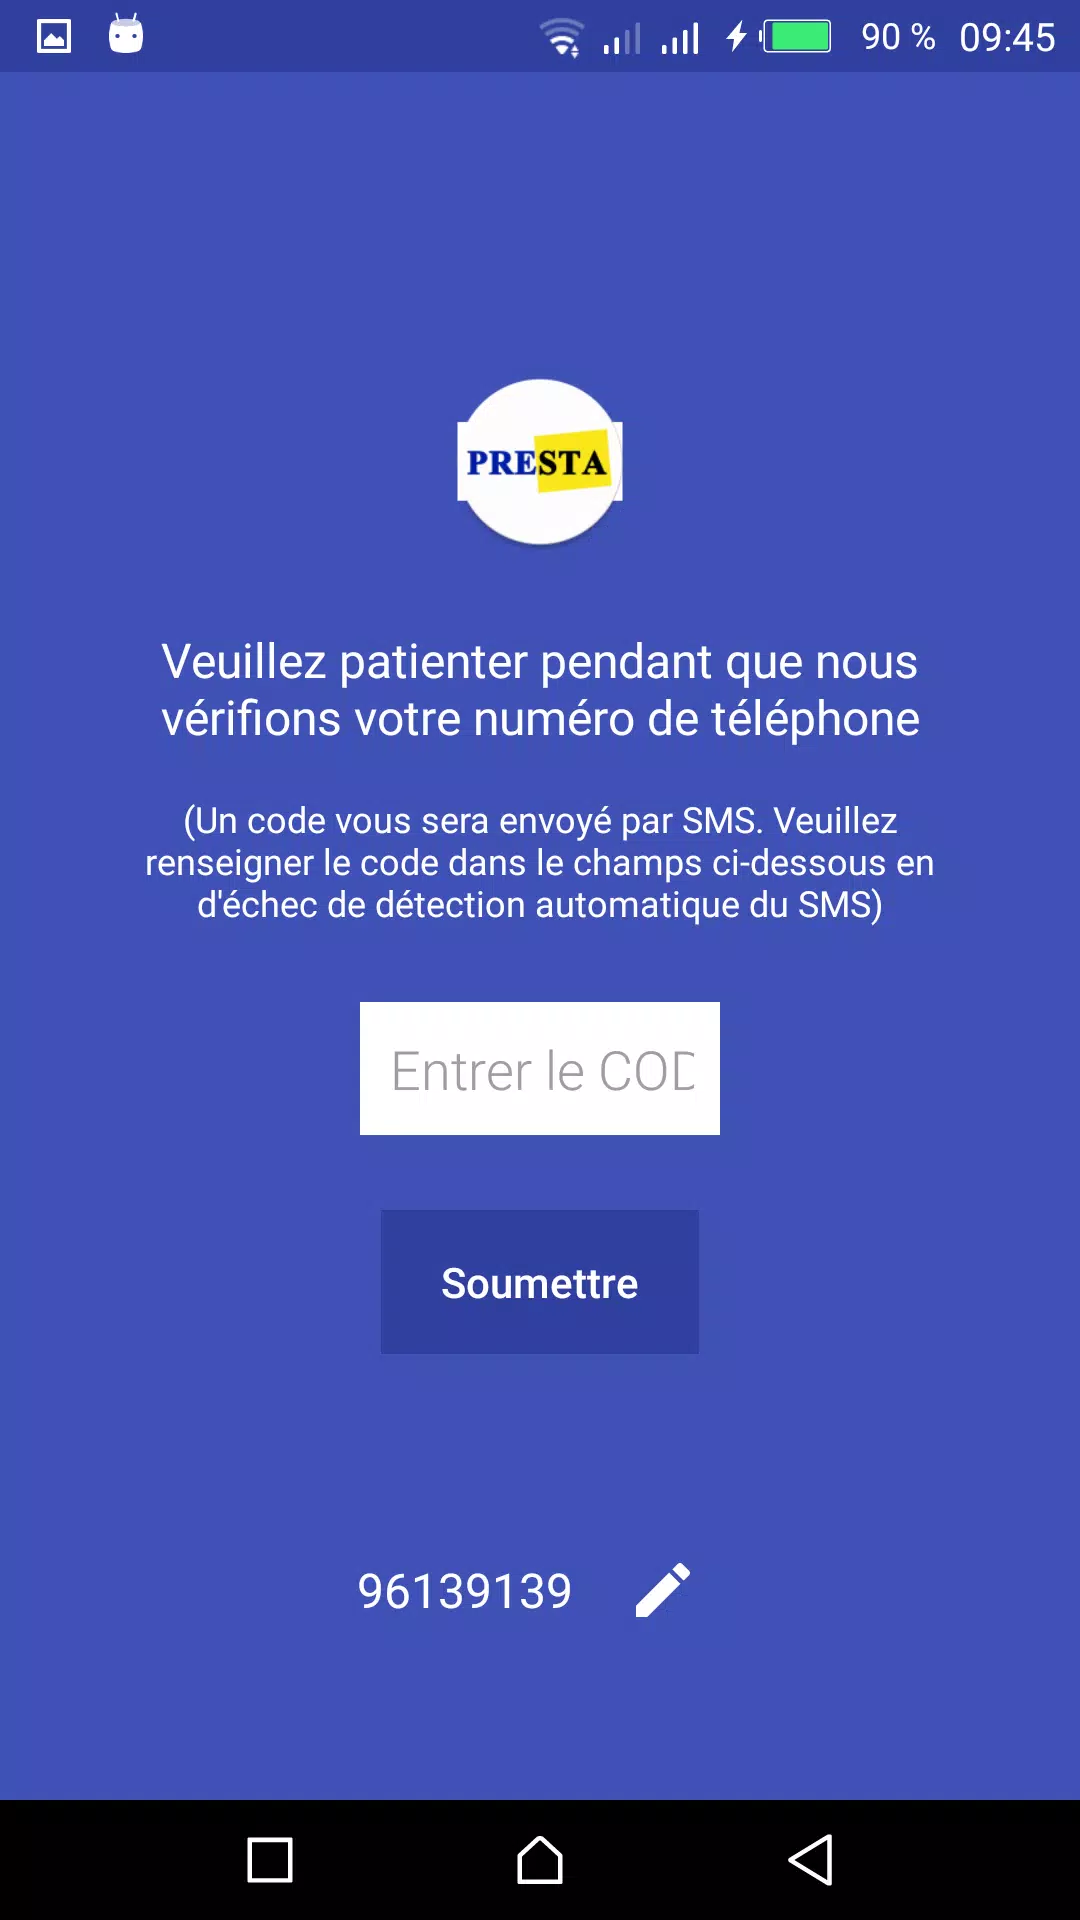 PRESTA for Android - APK Download